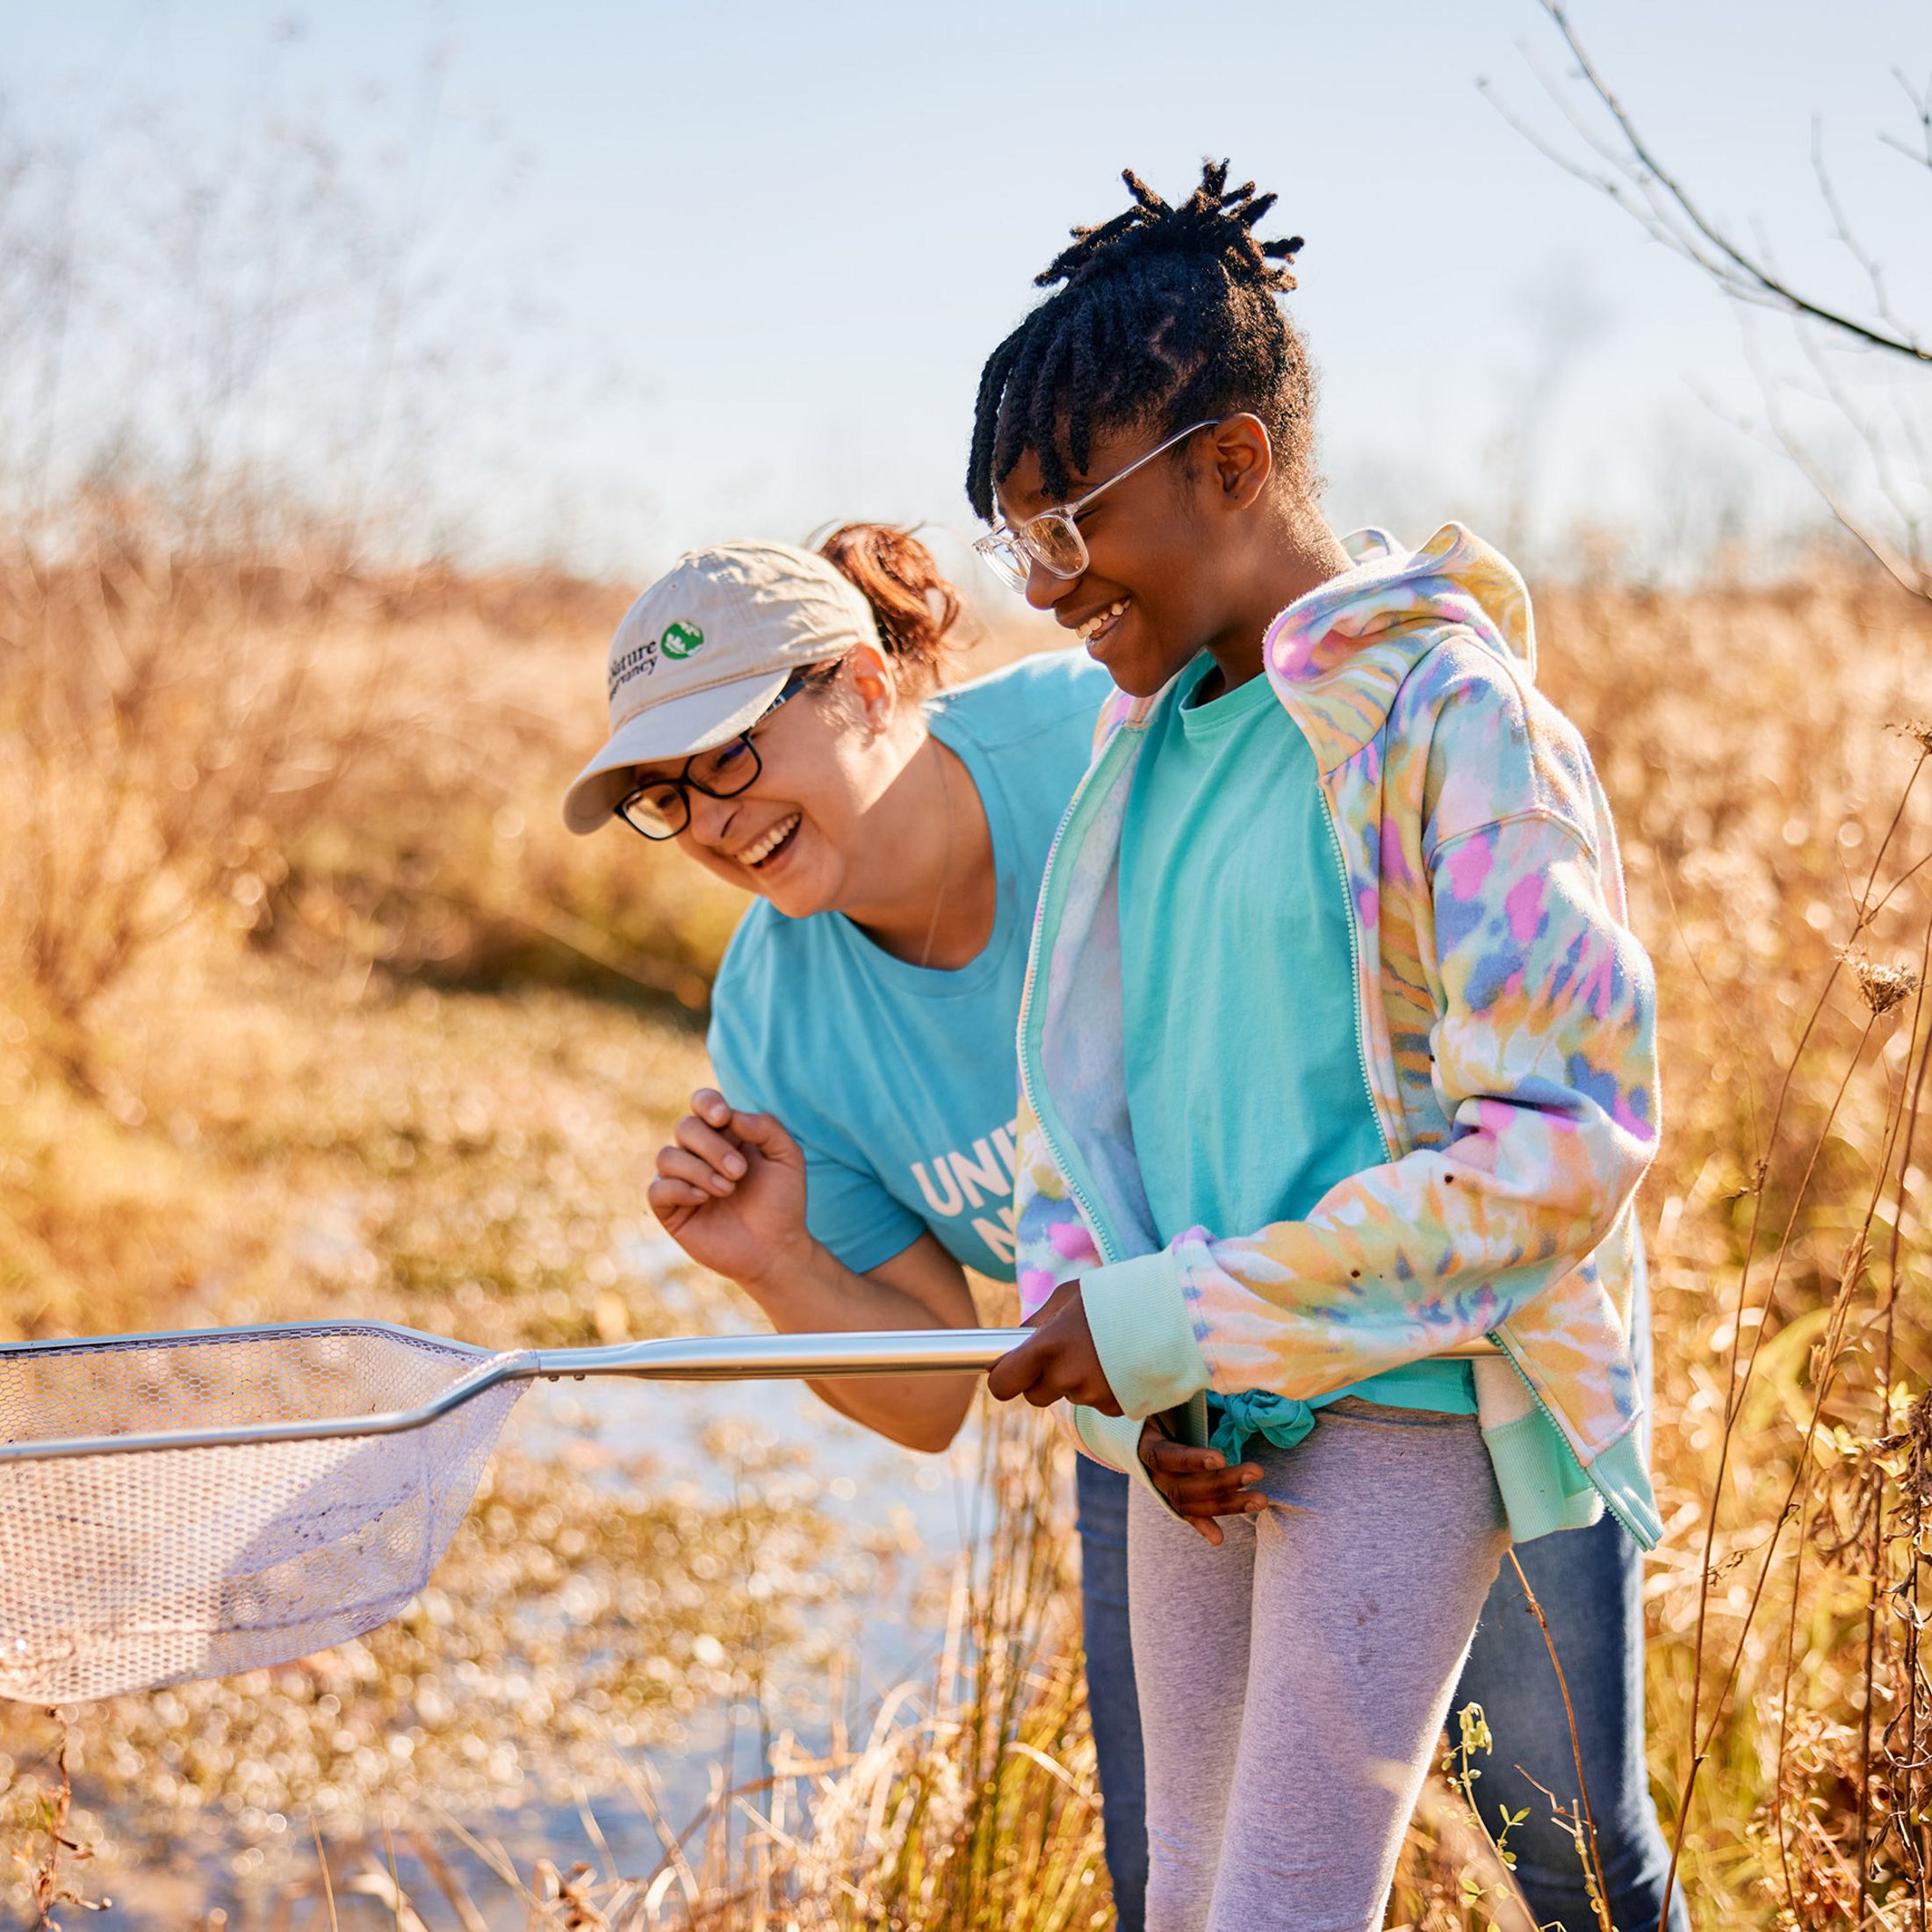 Angie Burke, community and conservation specialist for TNC OhIo, laughs as a girl holds a dip net over a small stream in a field.